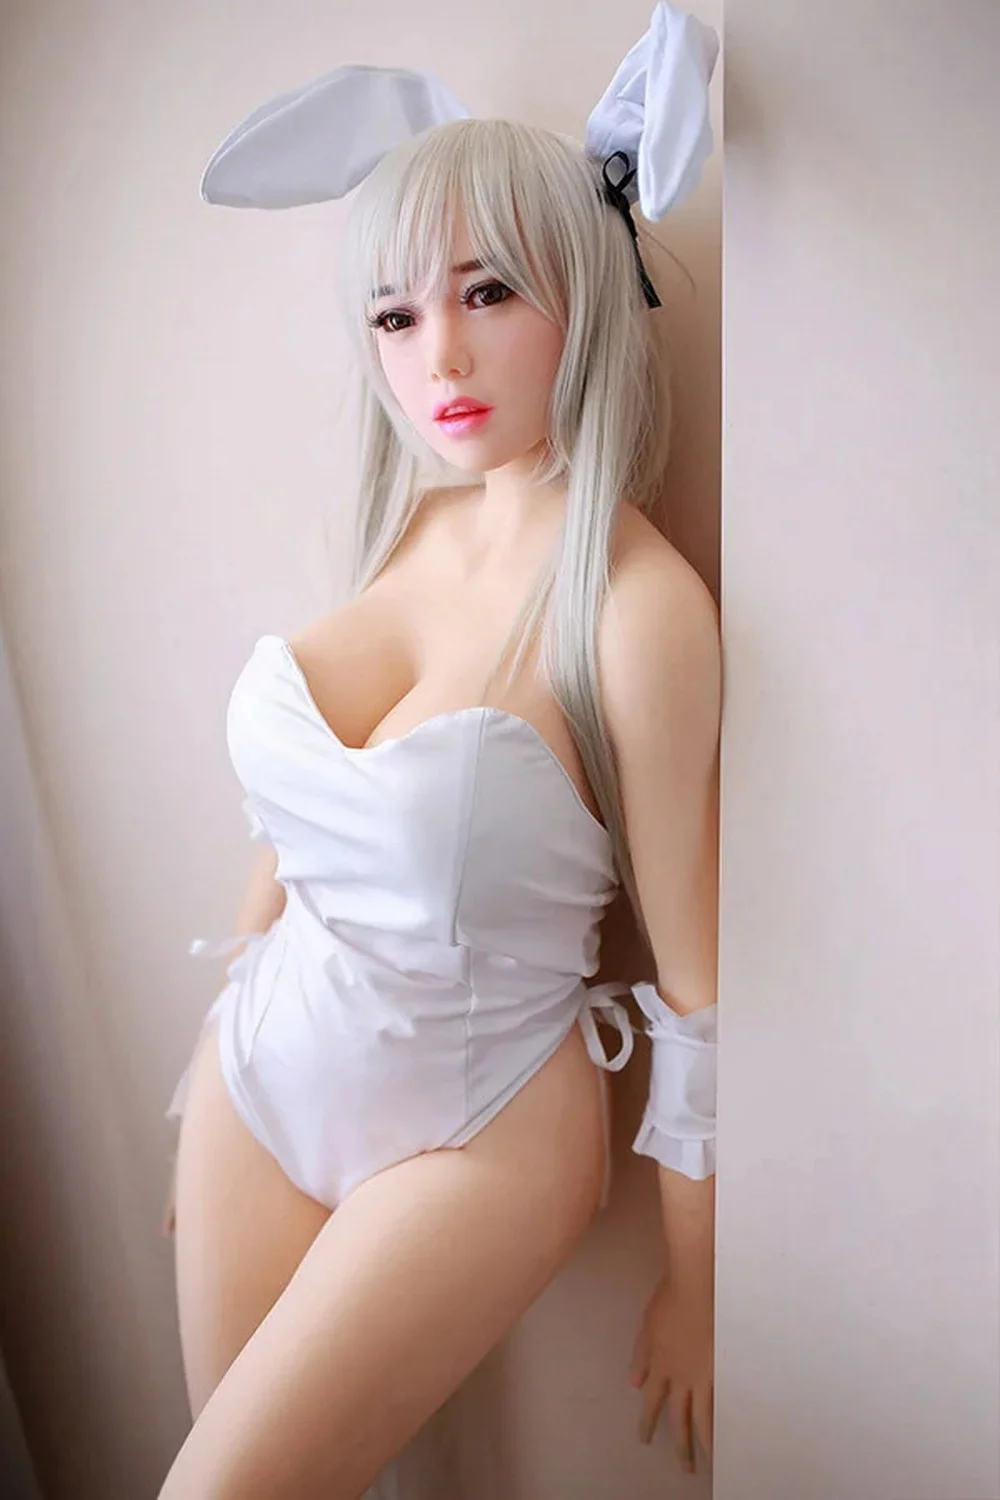 Anime sex doll wearing white bunny clothes leaning against the wall